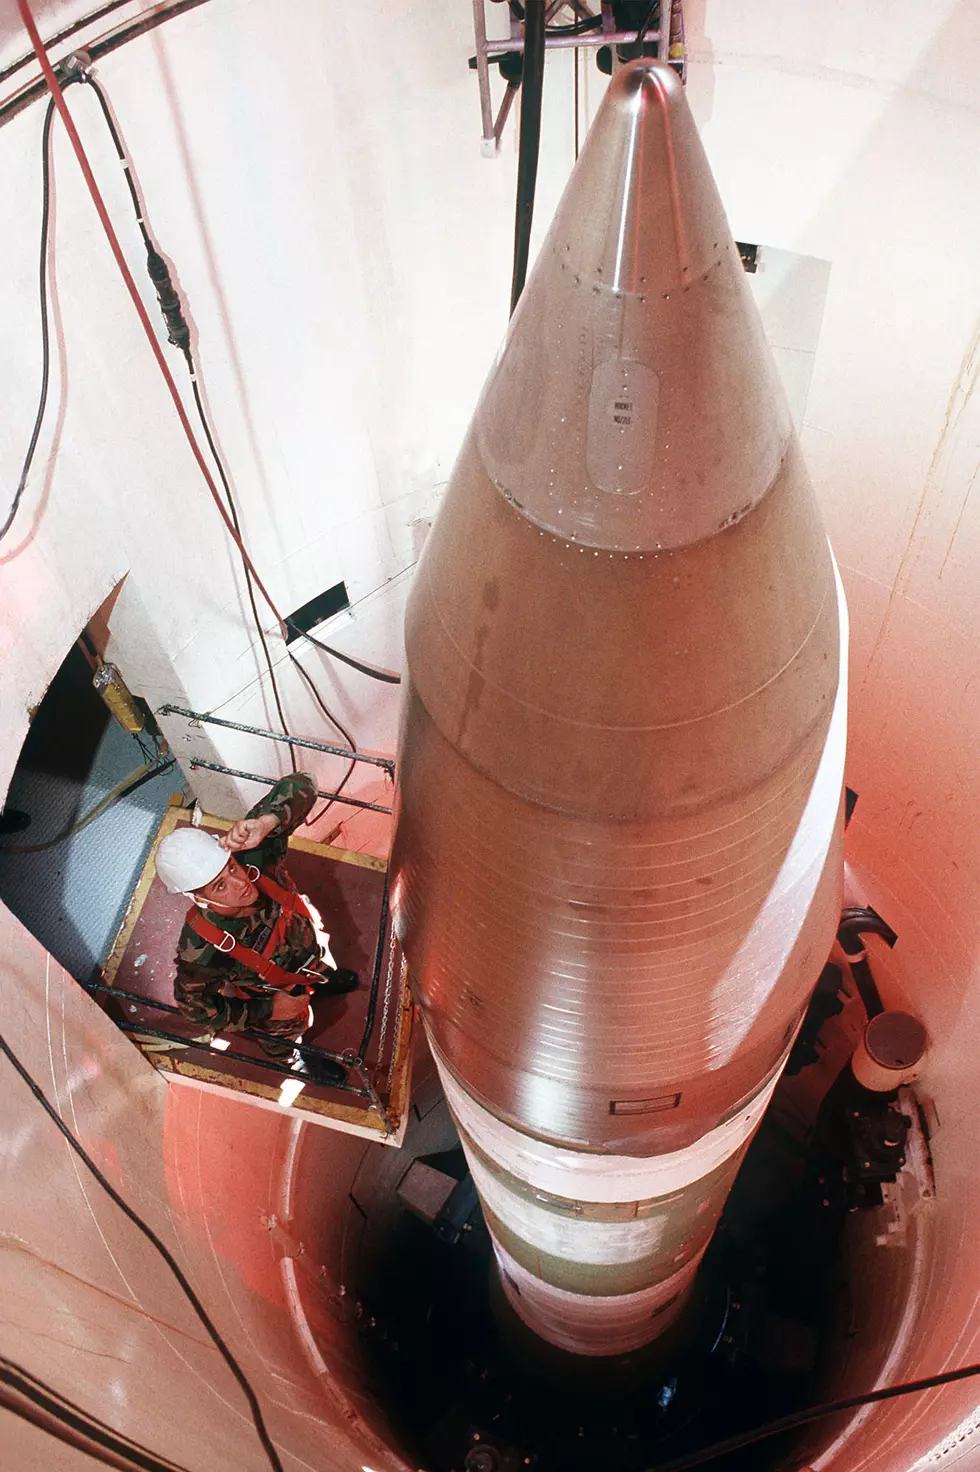 This Could be the Perfect 2020 Home – An Adirondack Atlas Missile Silo